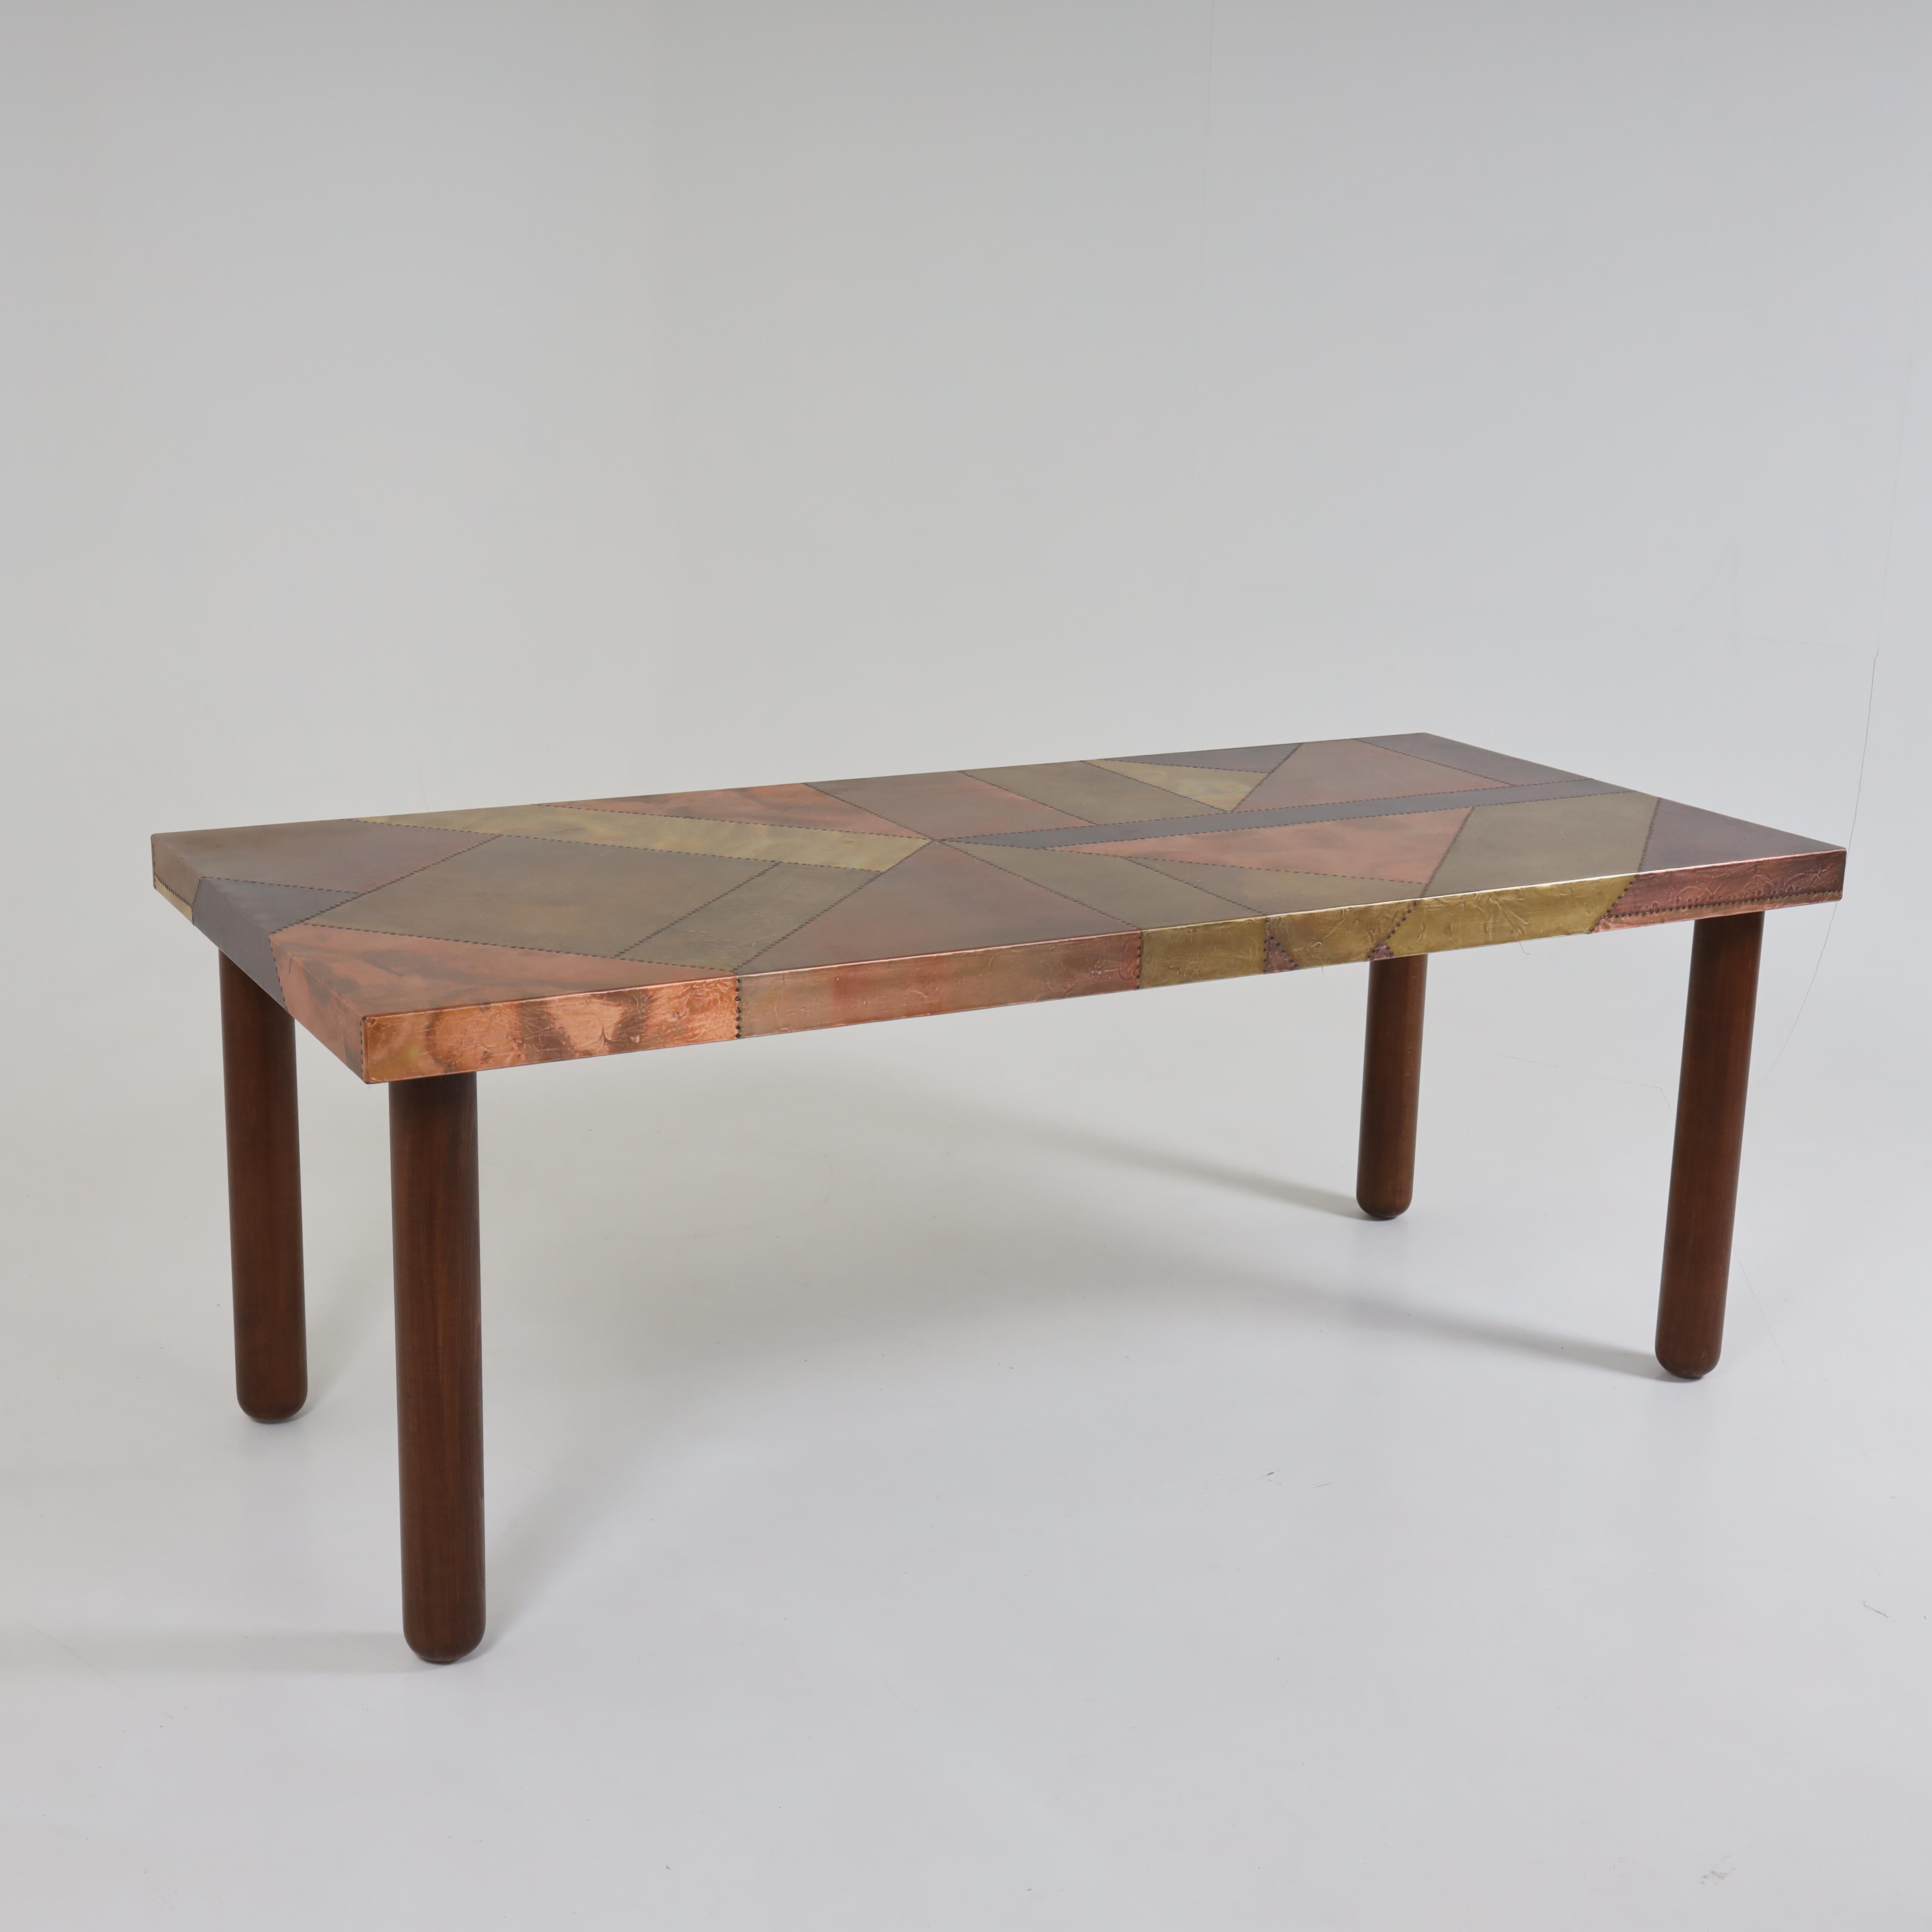 Italian Modernist dining table by Lorenzo Burchiellaro Wooden legs 
and shelves made of hammered and riveted metal surfaces in
geometric patterns. Laterally stamped 